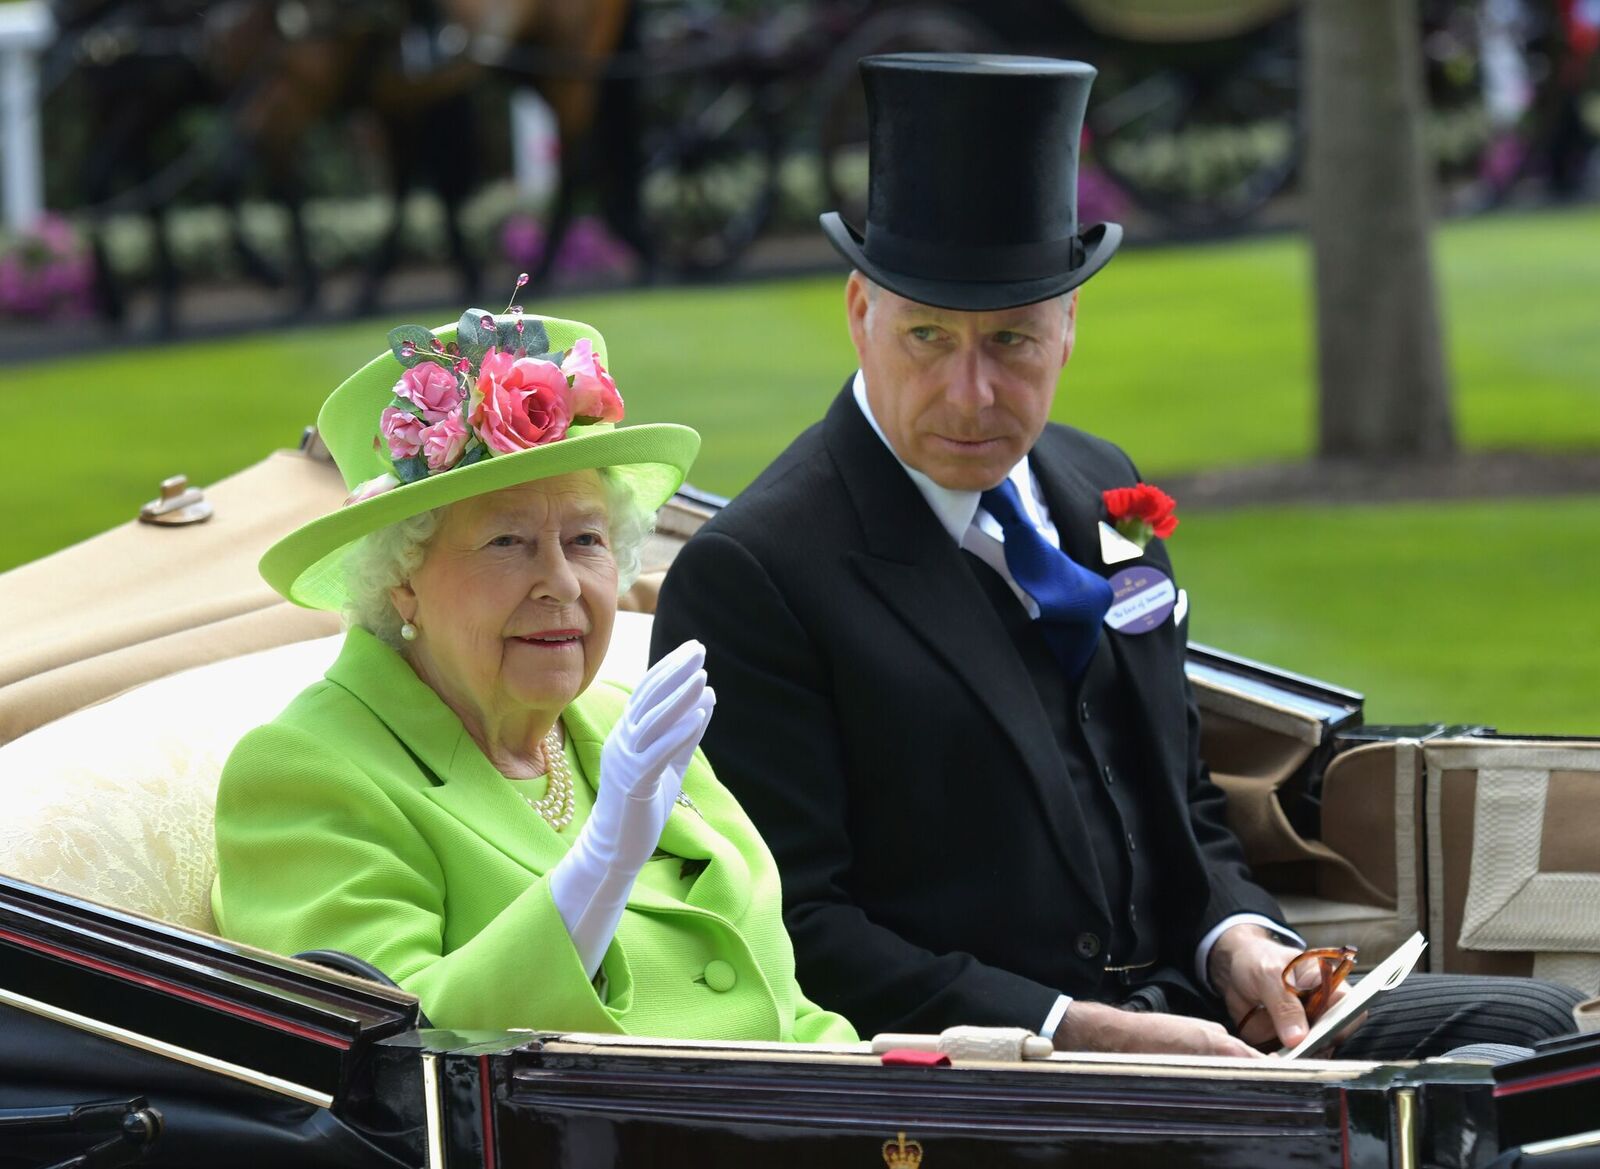 Queen Elizabeth II and David Armstrong-Jones, Earl of Snowdon arrive in the Royal procession on day 4 of Royal Ascot at Ascot Racecourse on June 22, 2018 in Ascot, England | Photo: Getty Images